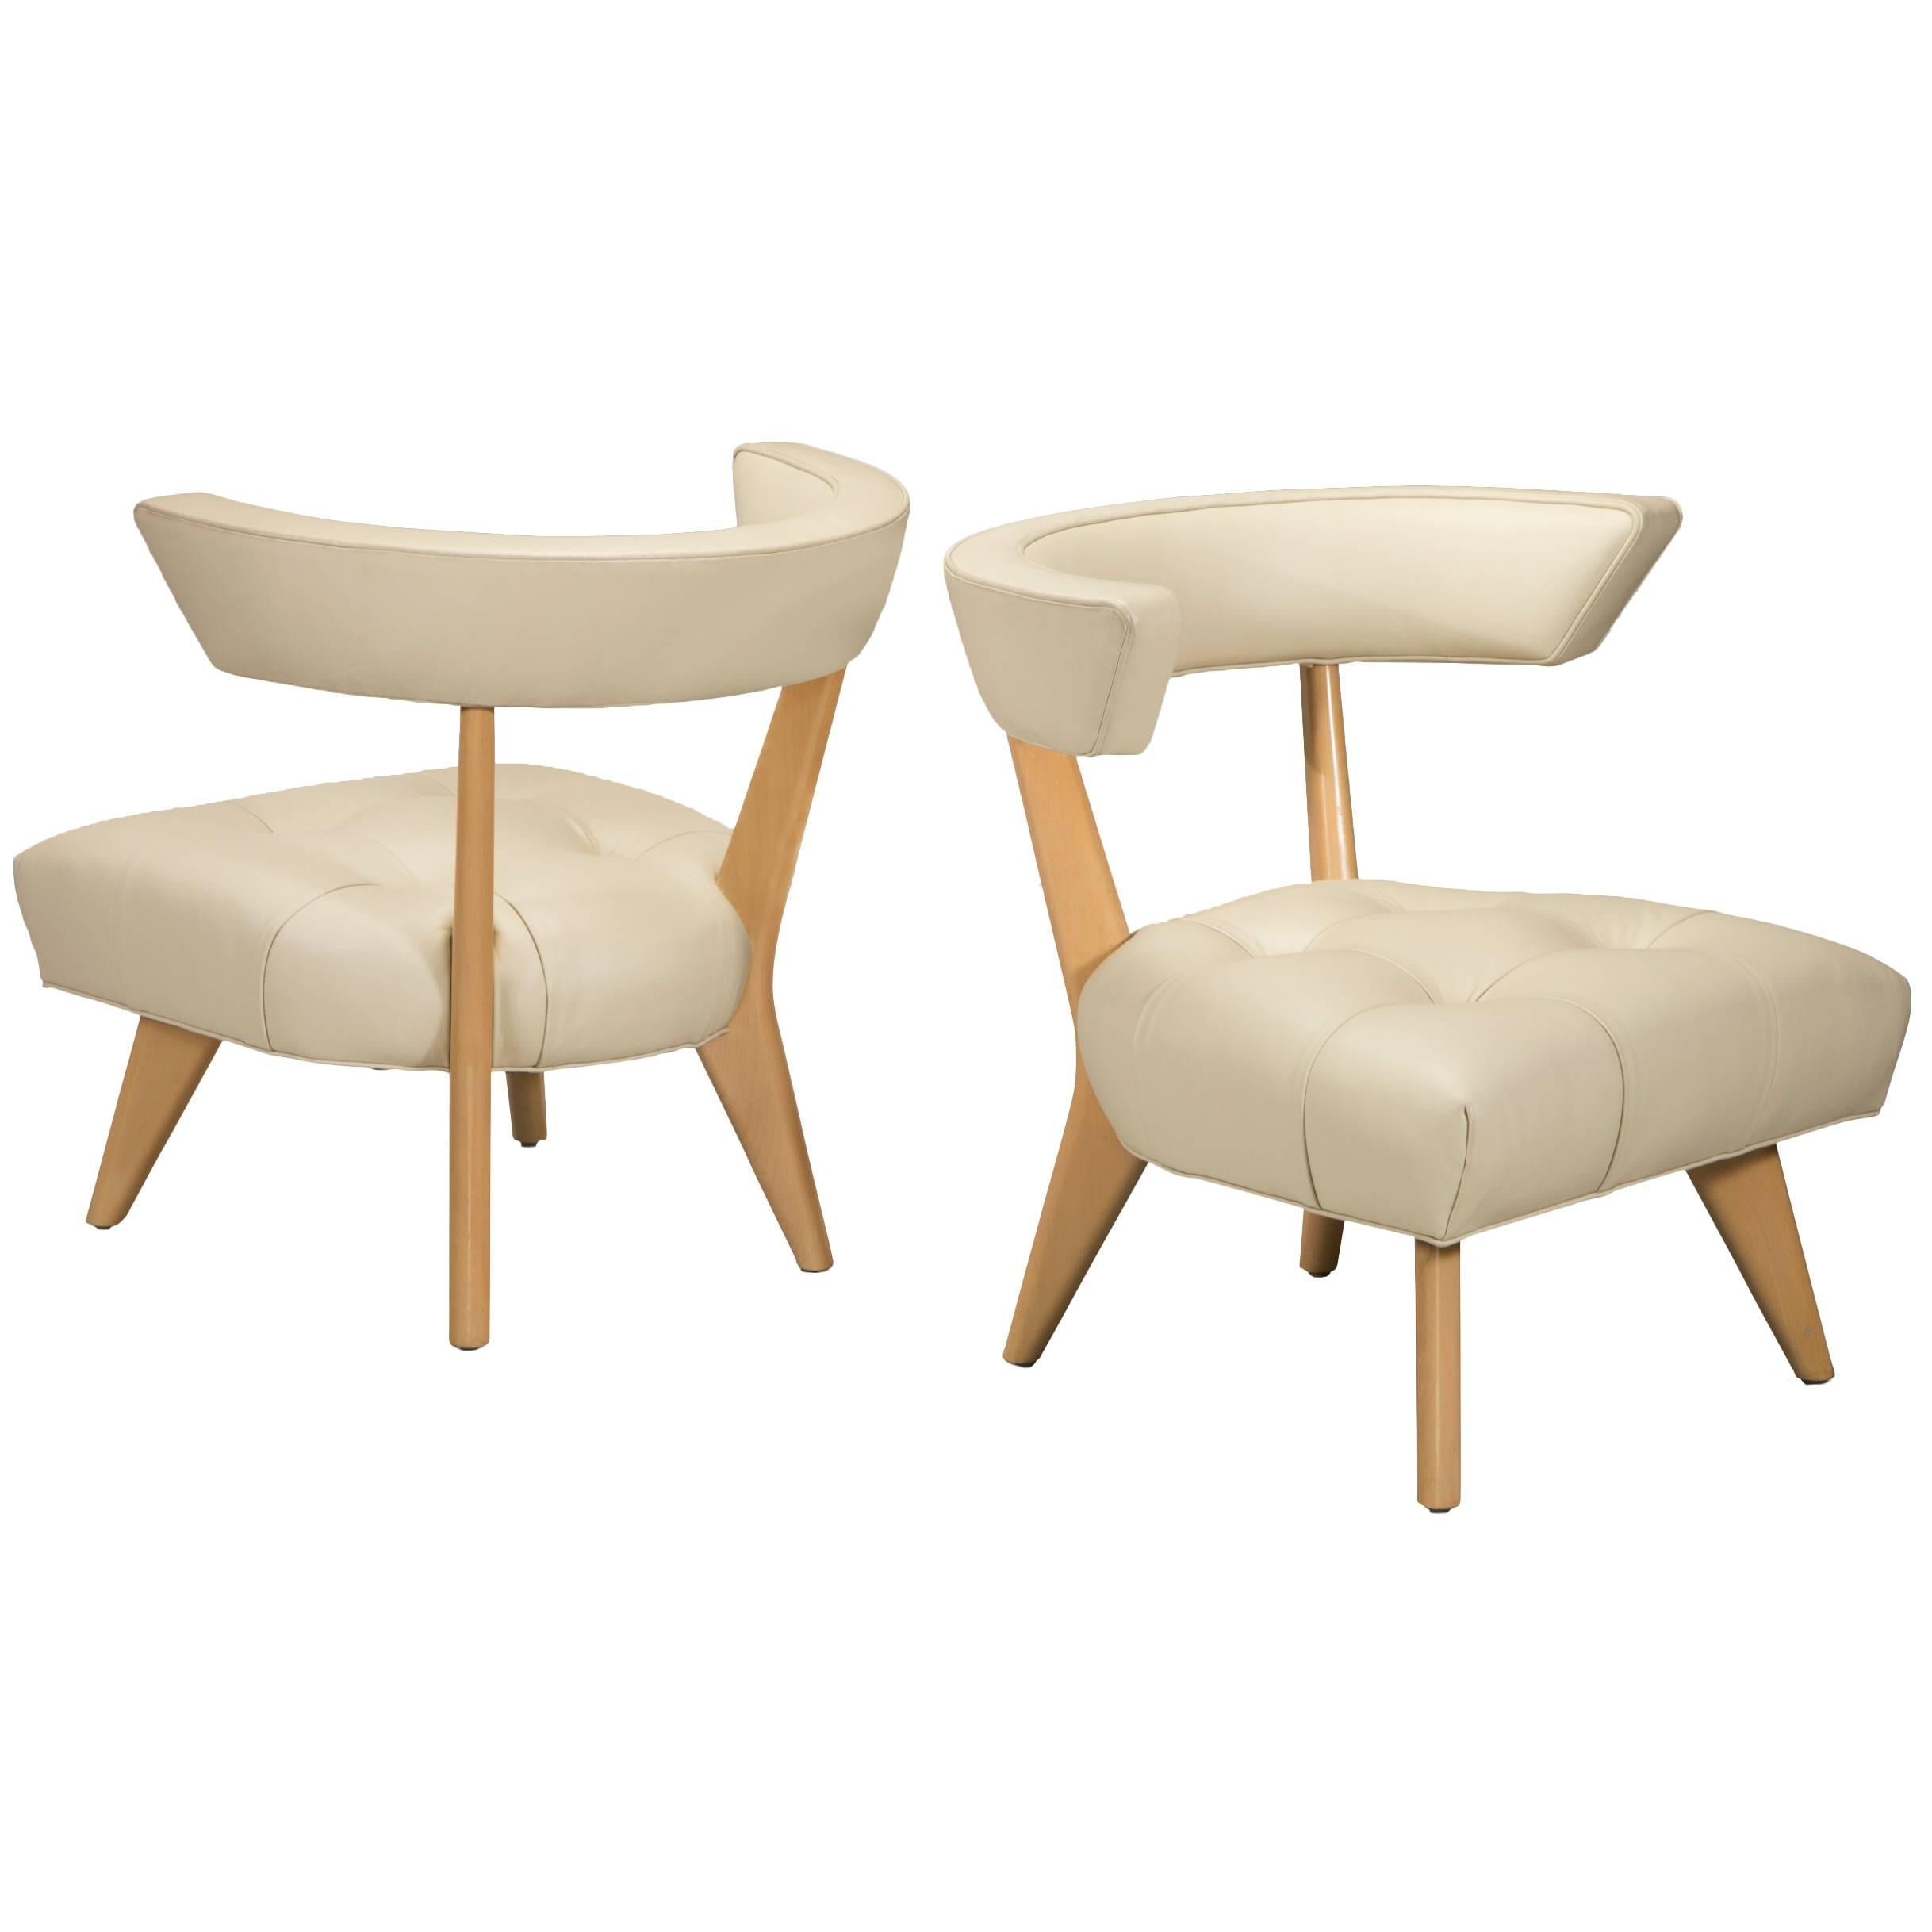 Billy Haines, Pair of Blonde Glazed Wood and Ivory Upholstered Hostess Chairs im Angebot